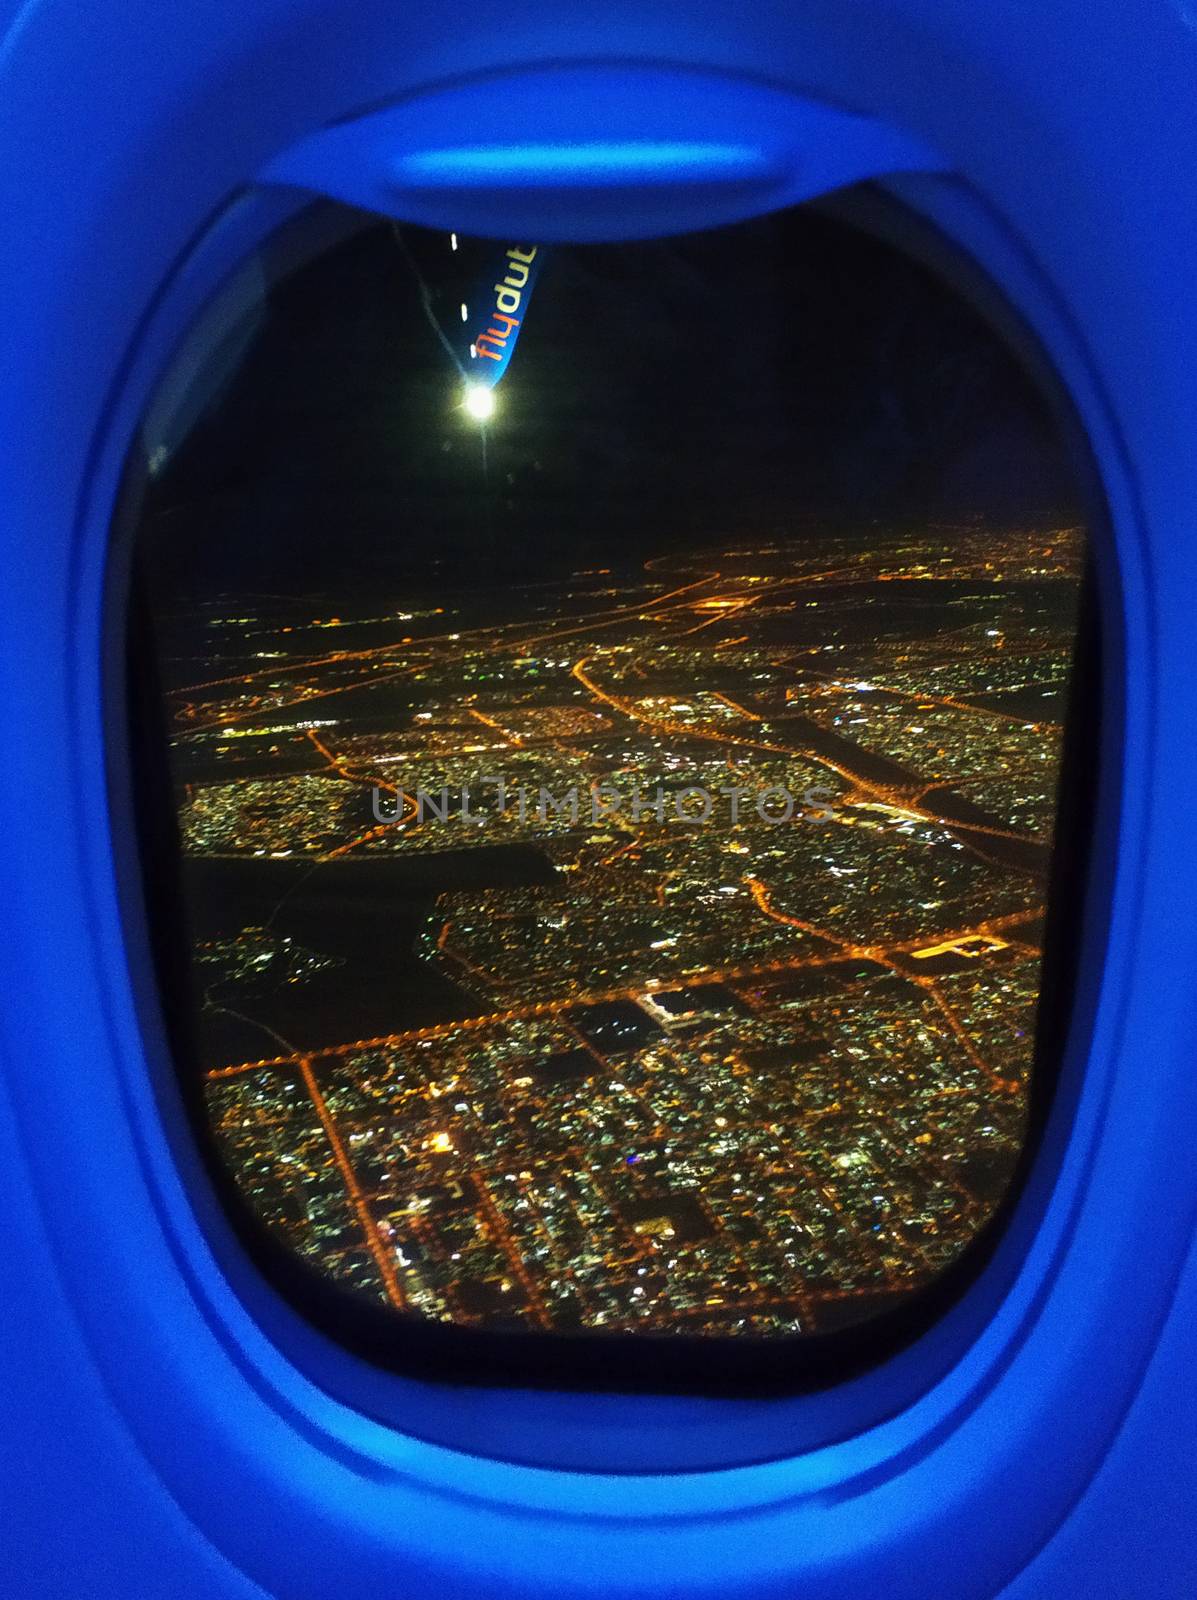 the view from the plane to the lights of the night city.